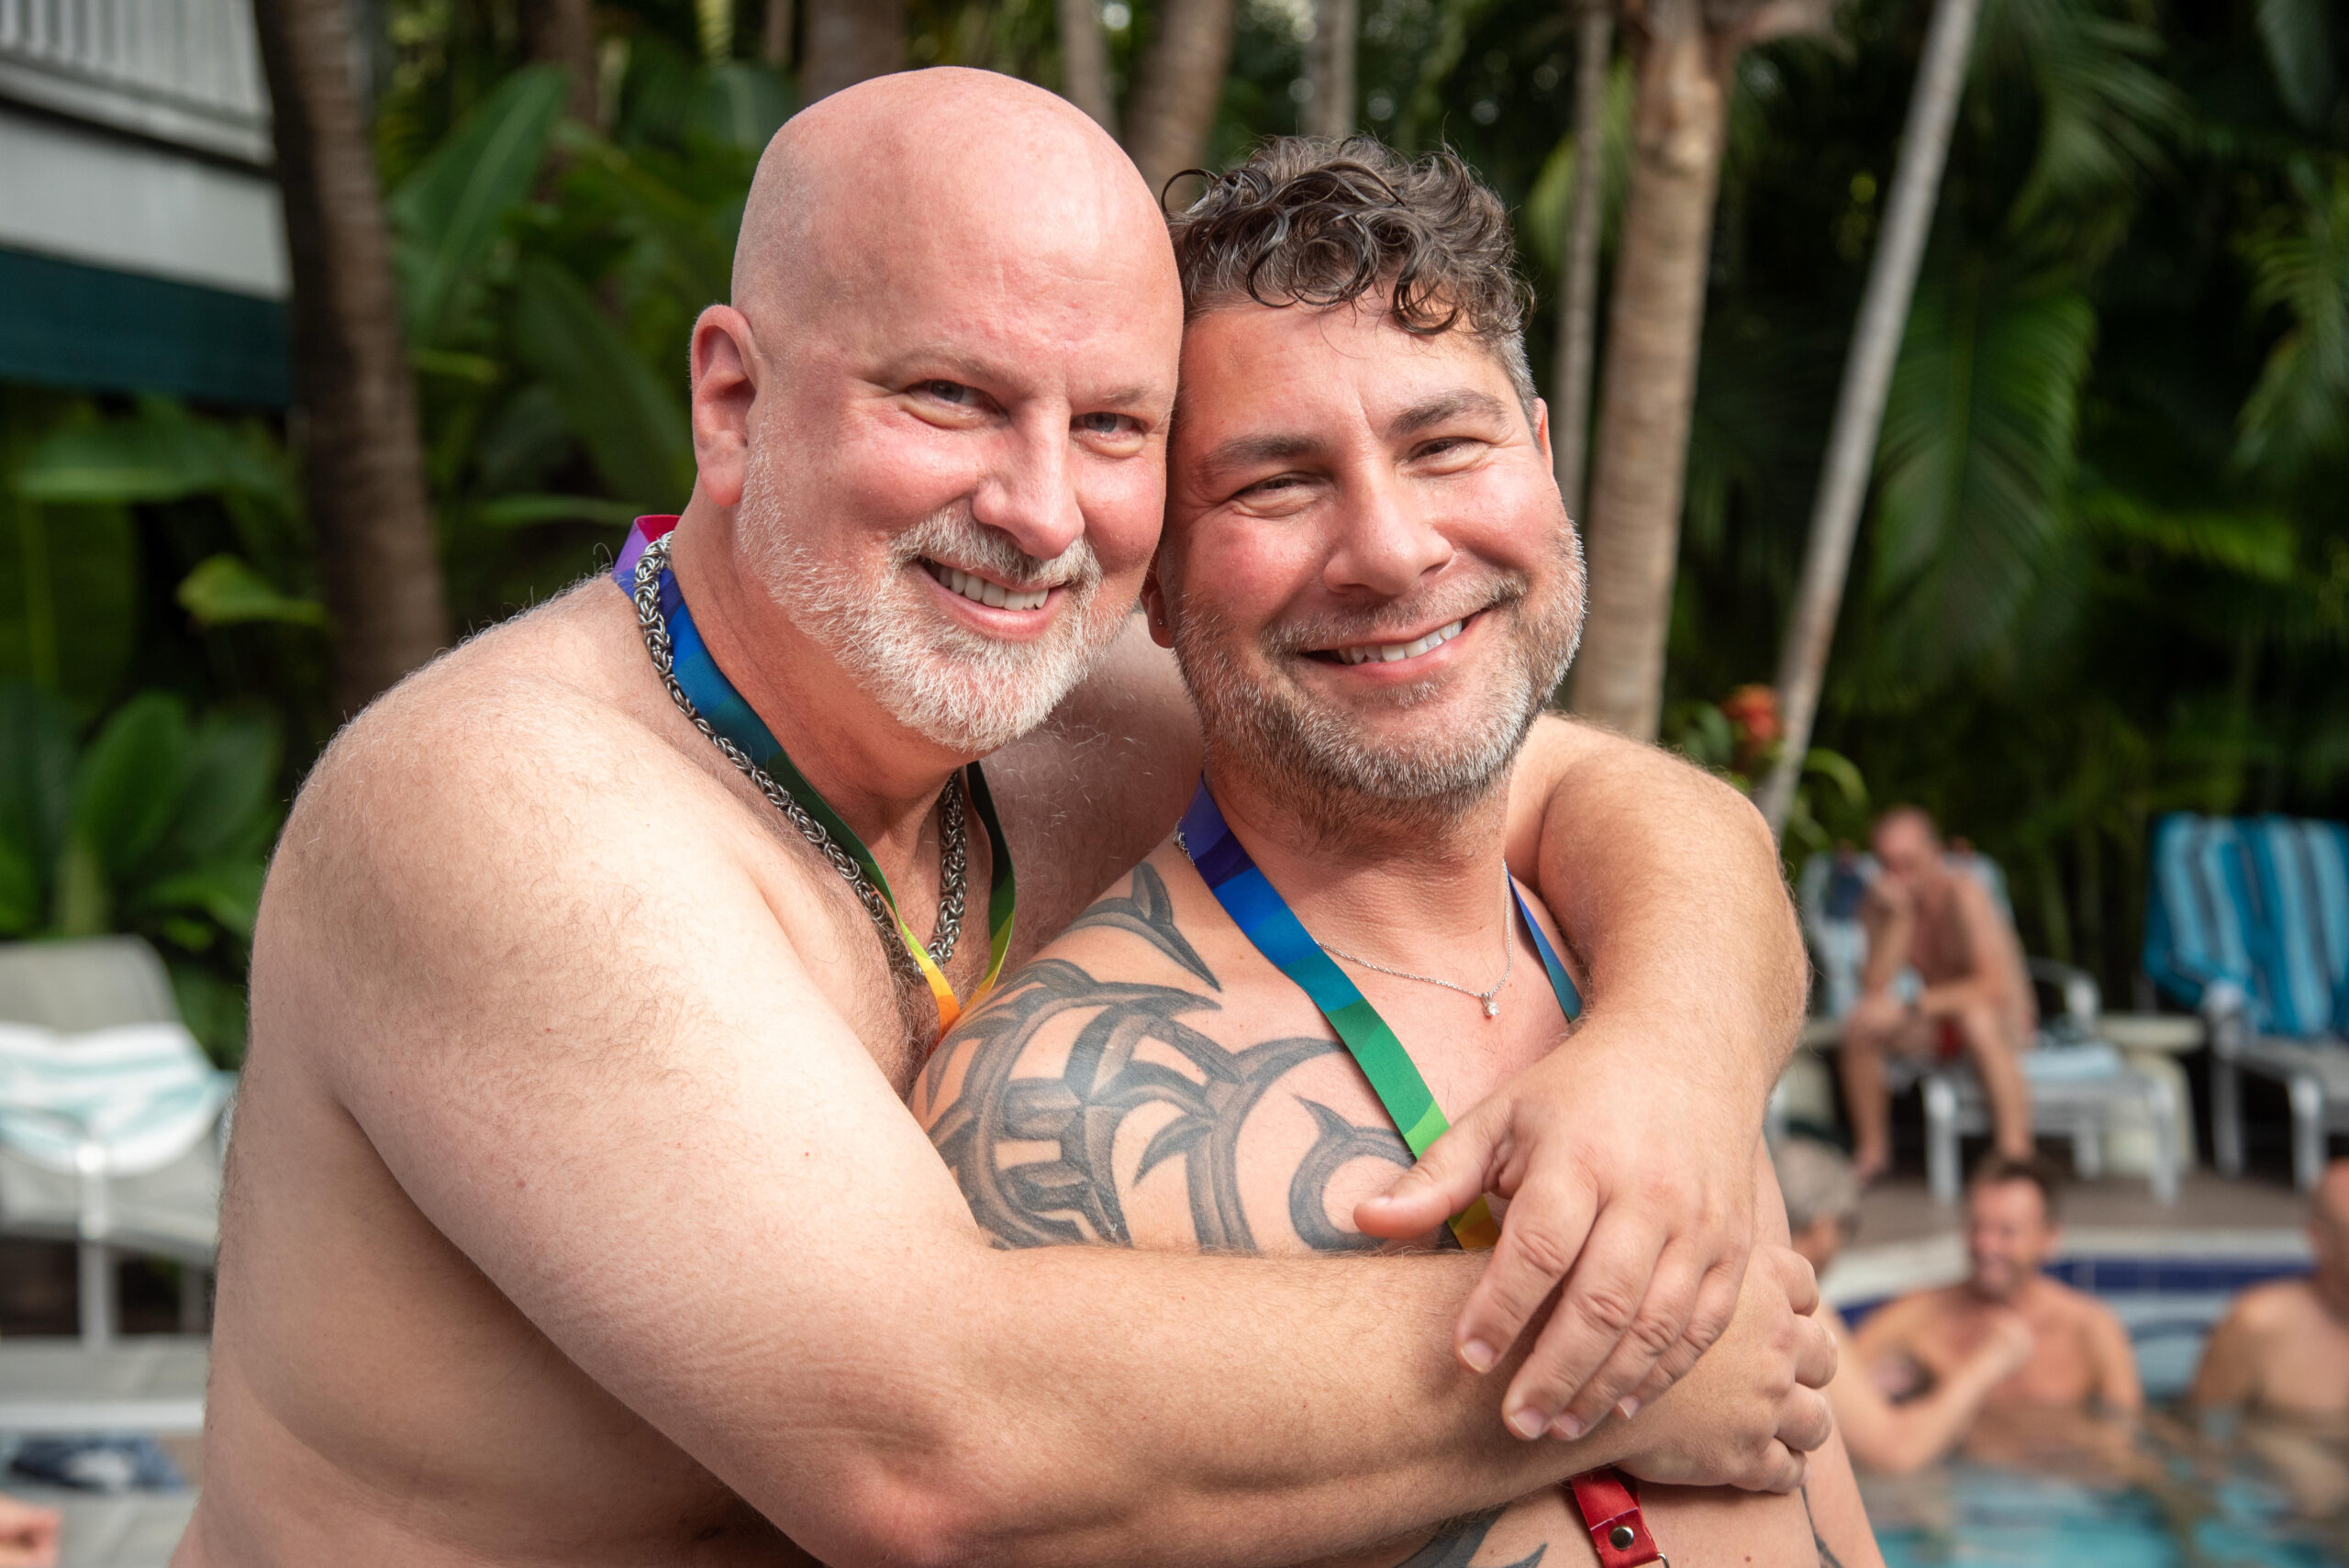 Nick Vannello (on left) with his friend, Chris, at Island House in Key West, Florida (Photo Credit: GoNaked)